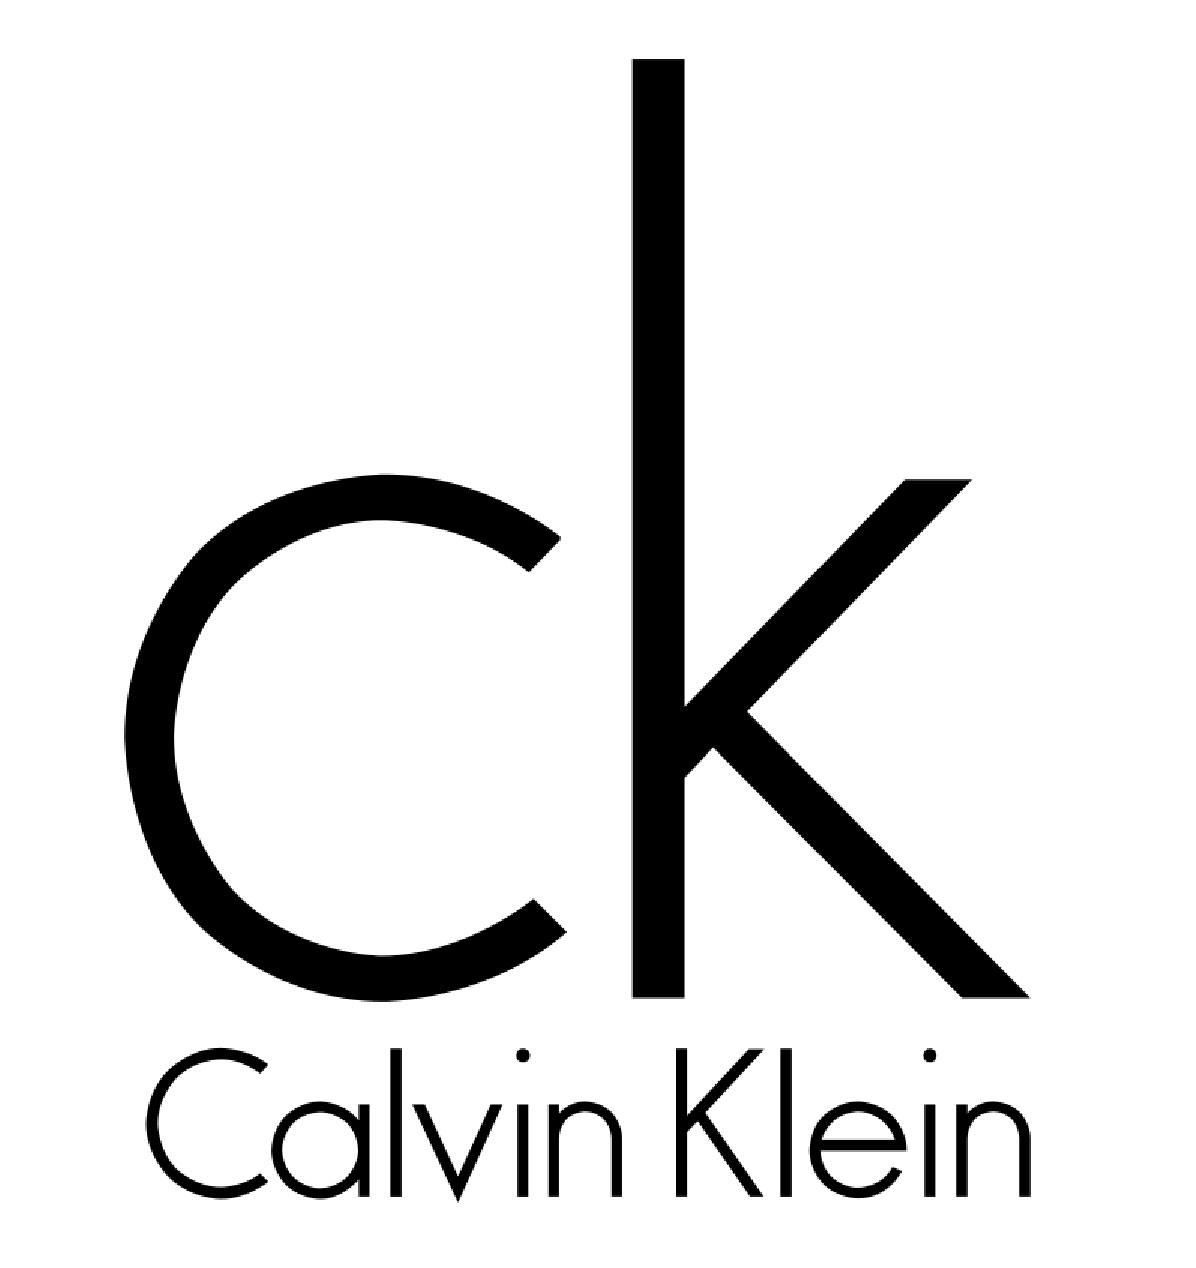 Buy Original Calvin klein Products At Best Price in Tanzania